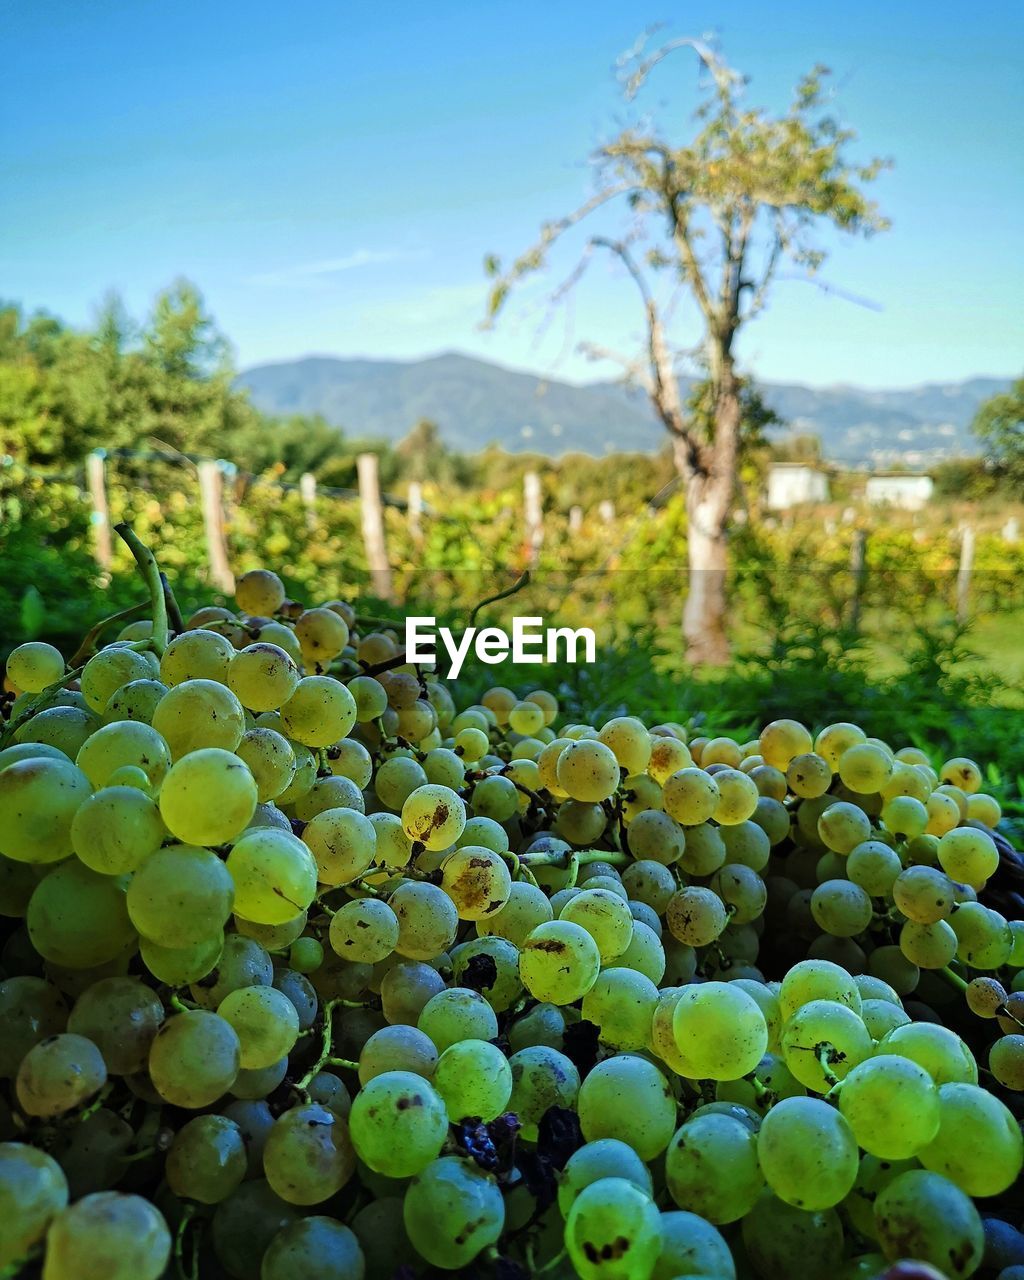 VIEW OF GRAPES GROWING ON FIELD